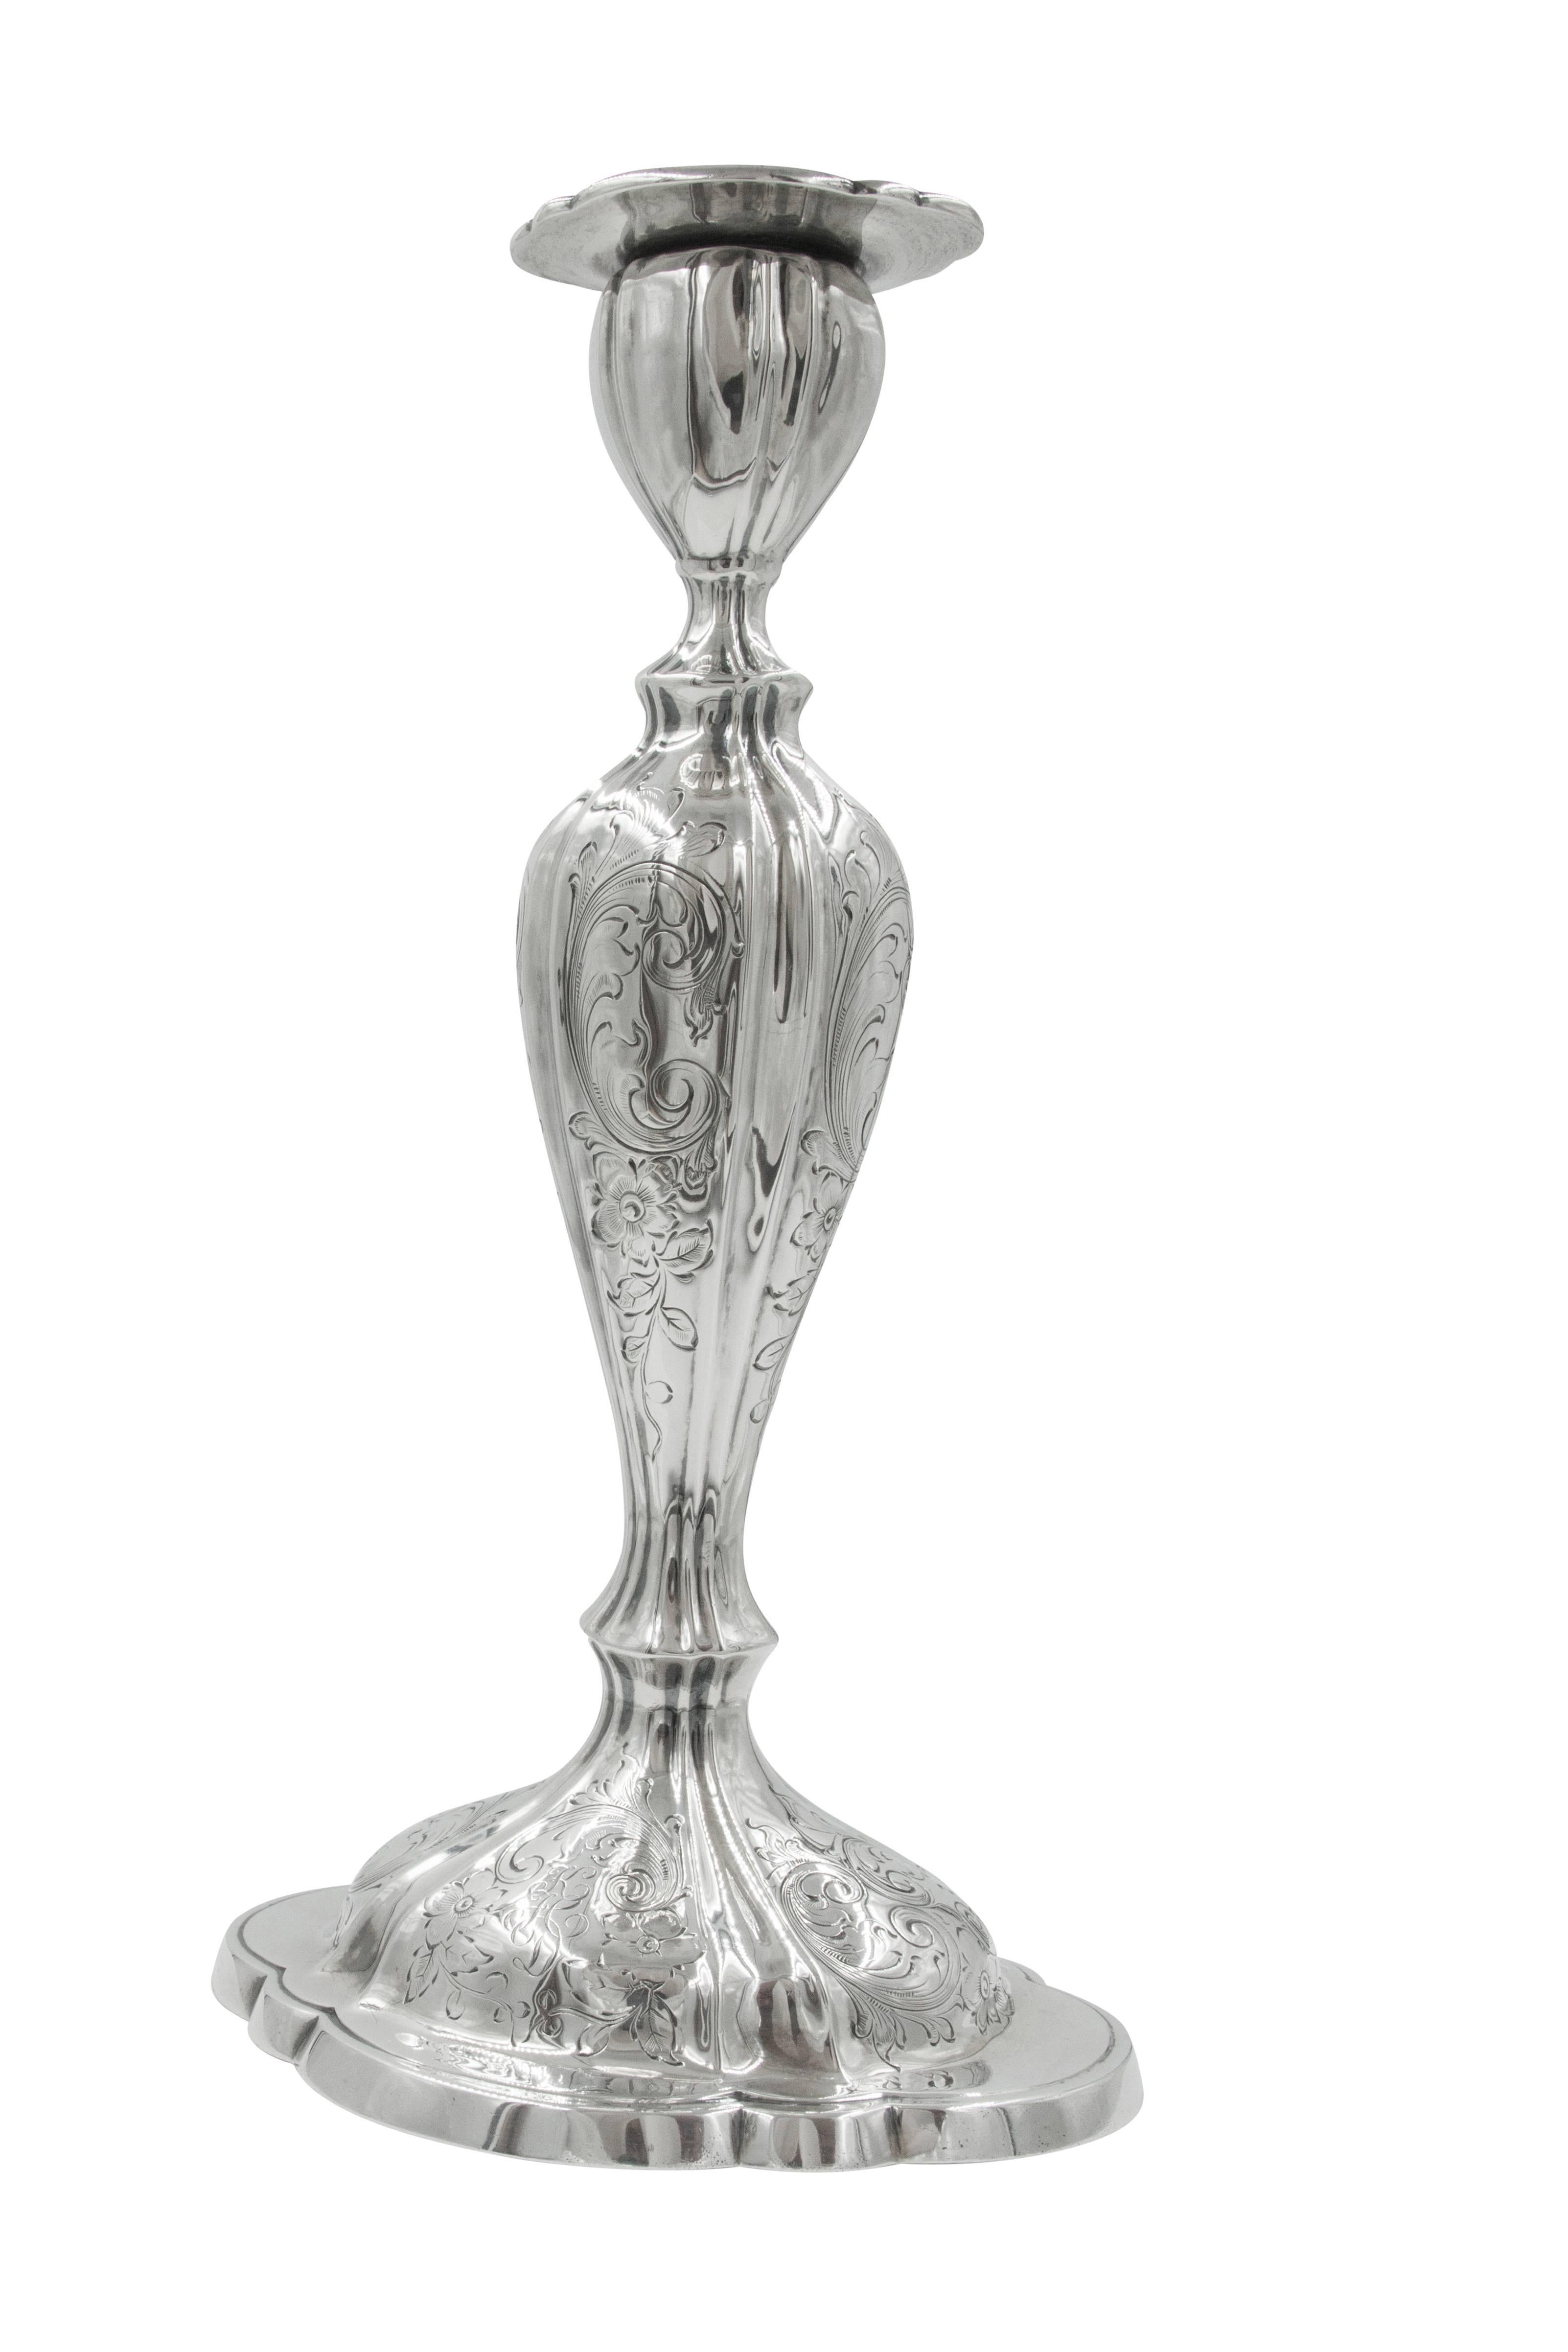 These 111 years old candlesticks have grace. There's a gracefulness to them that is unique, maybe it's the floral etching that decorate not only the body but also the base, or maybe it's the feminine, curvy Silhouette? Whichever you think, we know